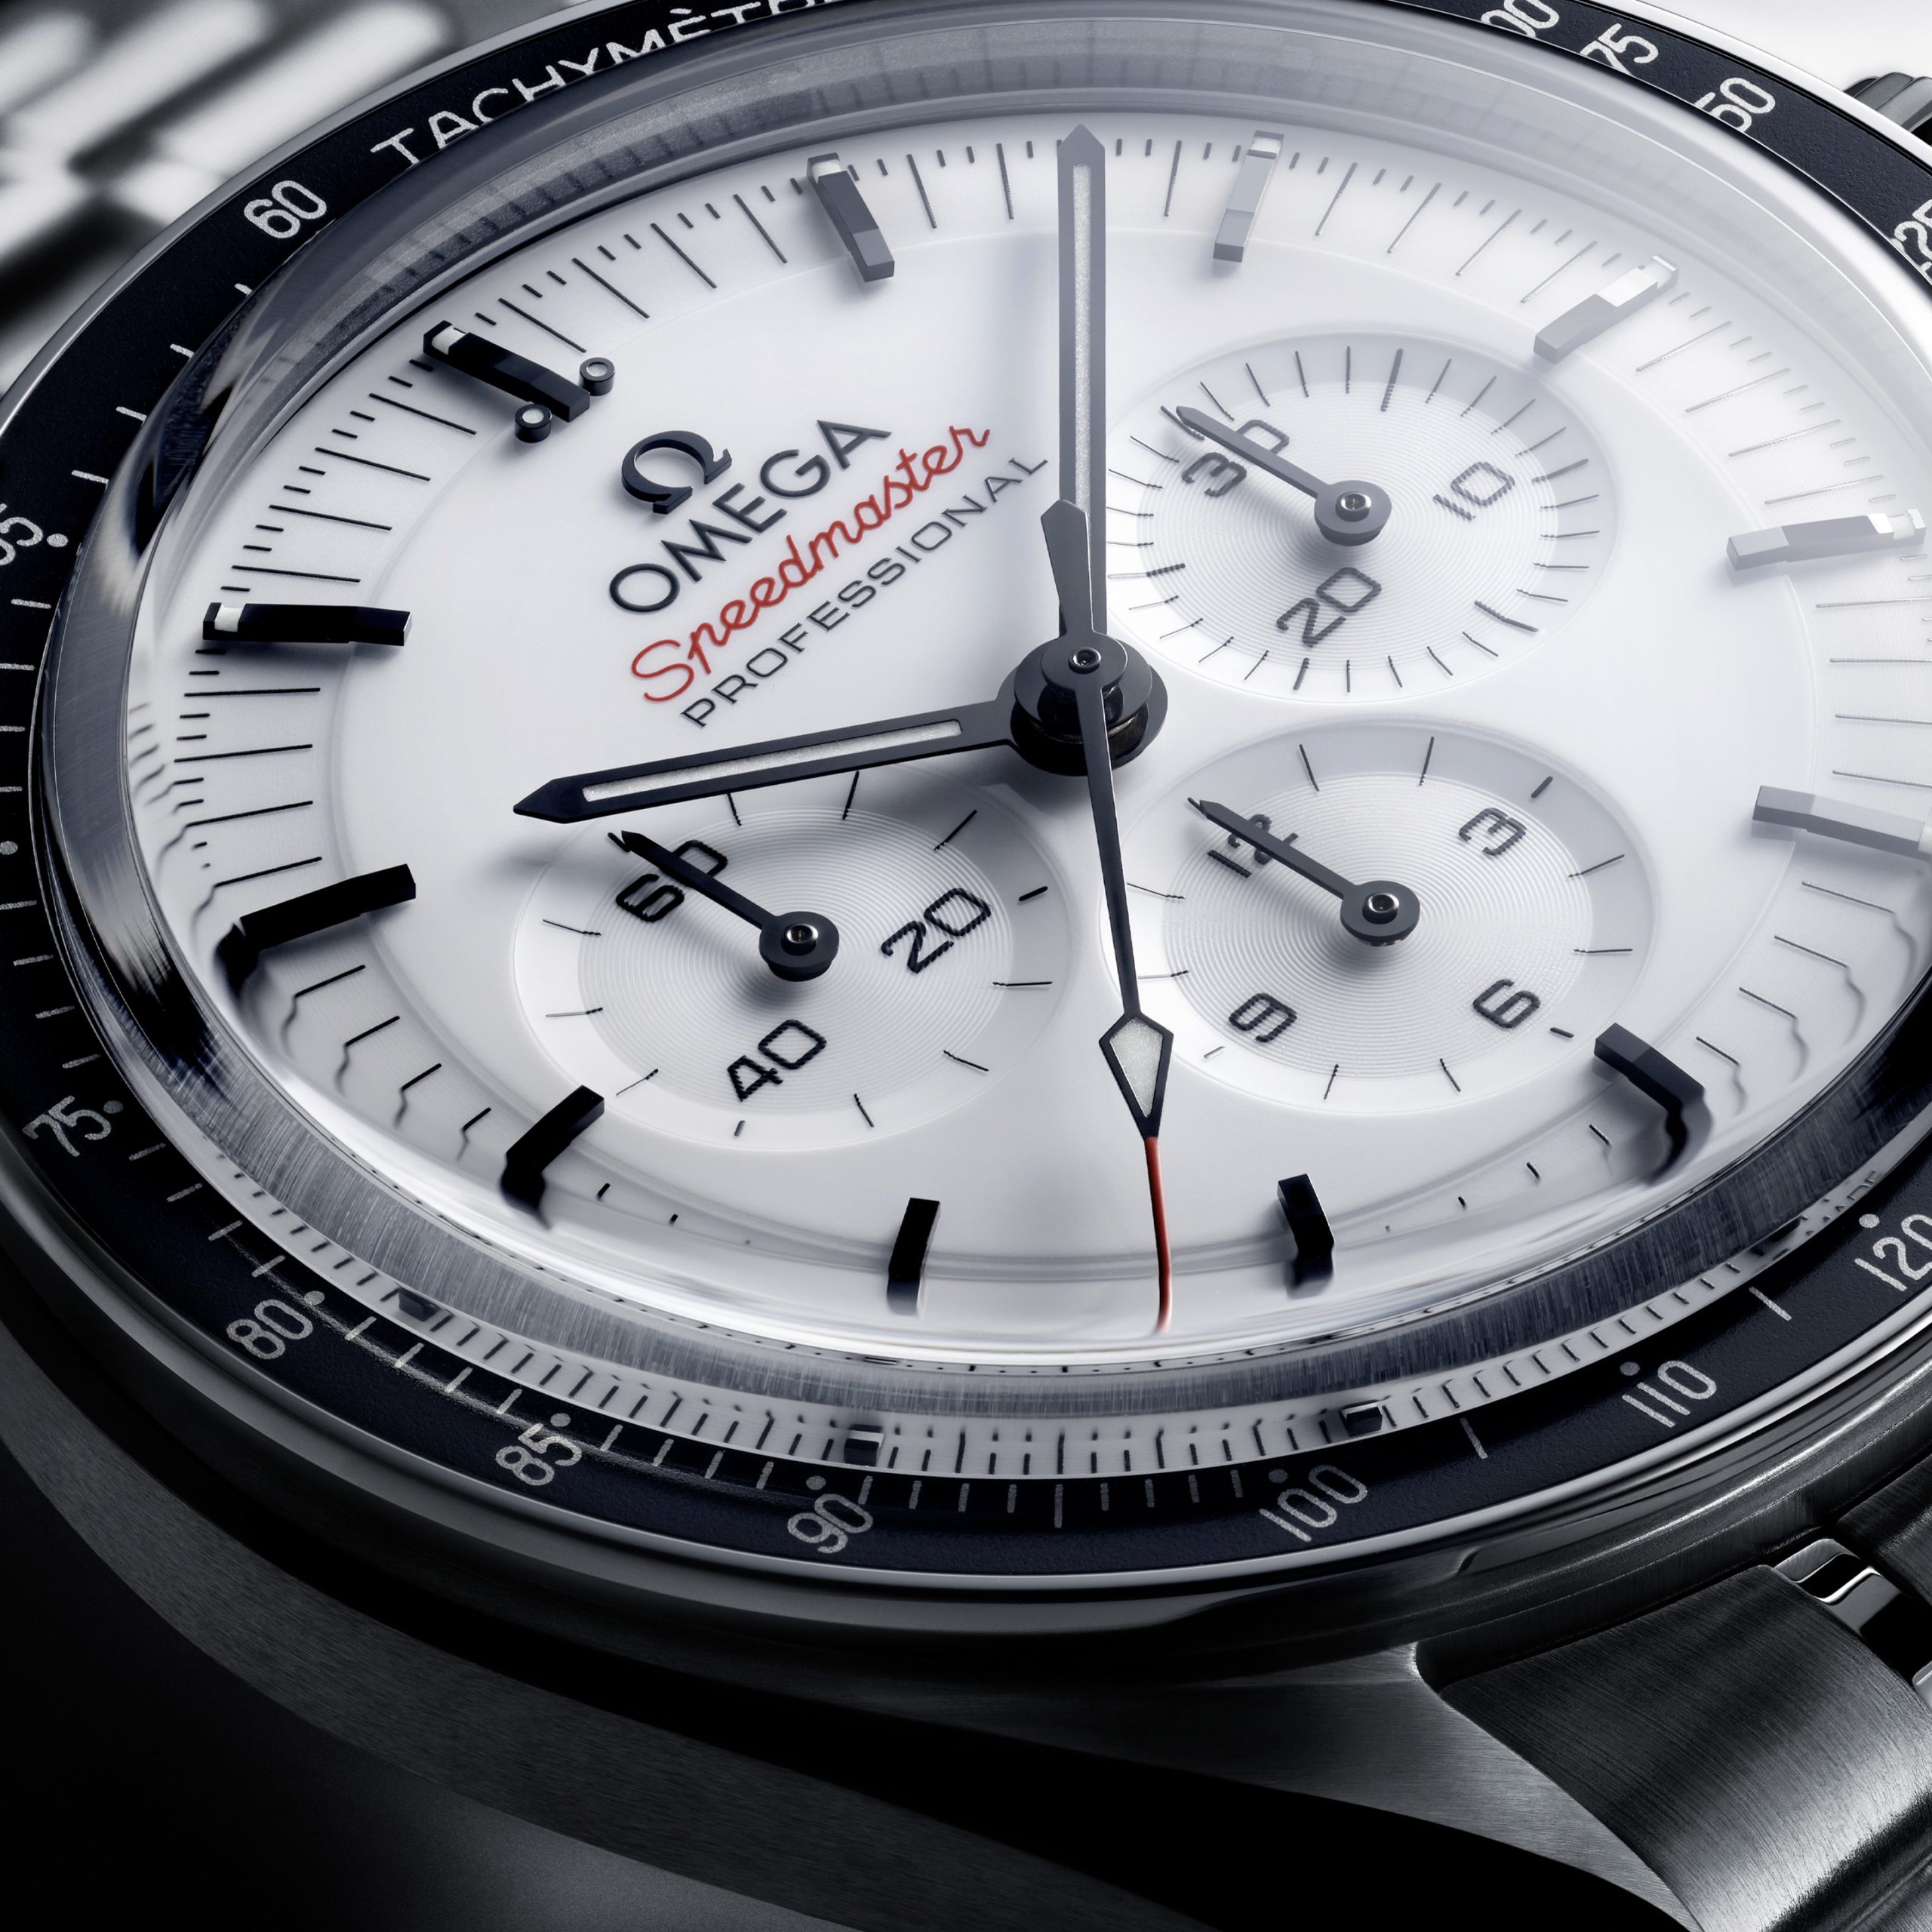 Omega Just Dropped New Speedmaster Watches With New Movements, Dials and  Metal